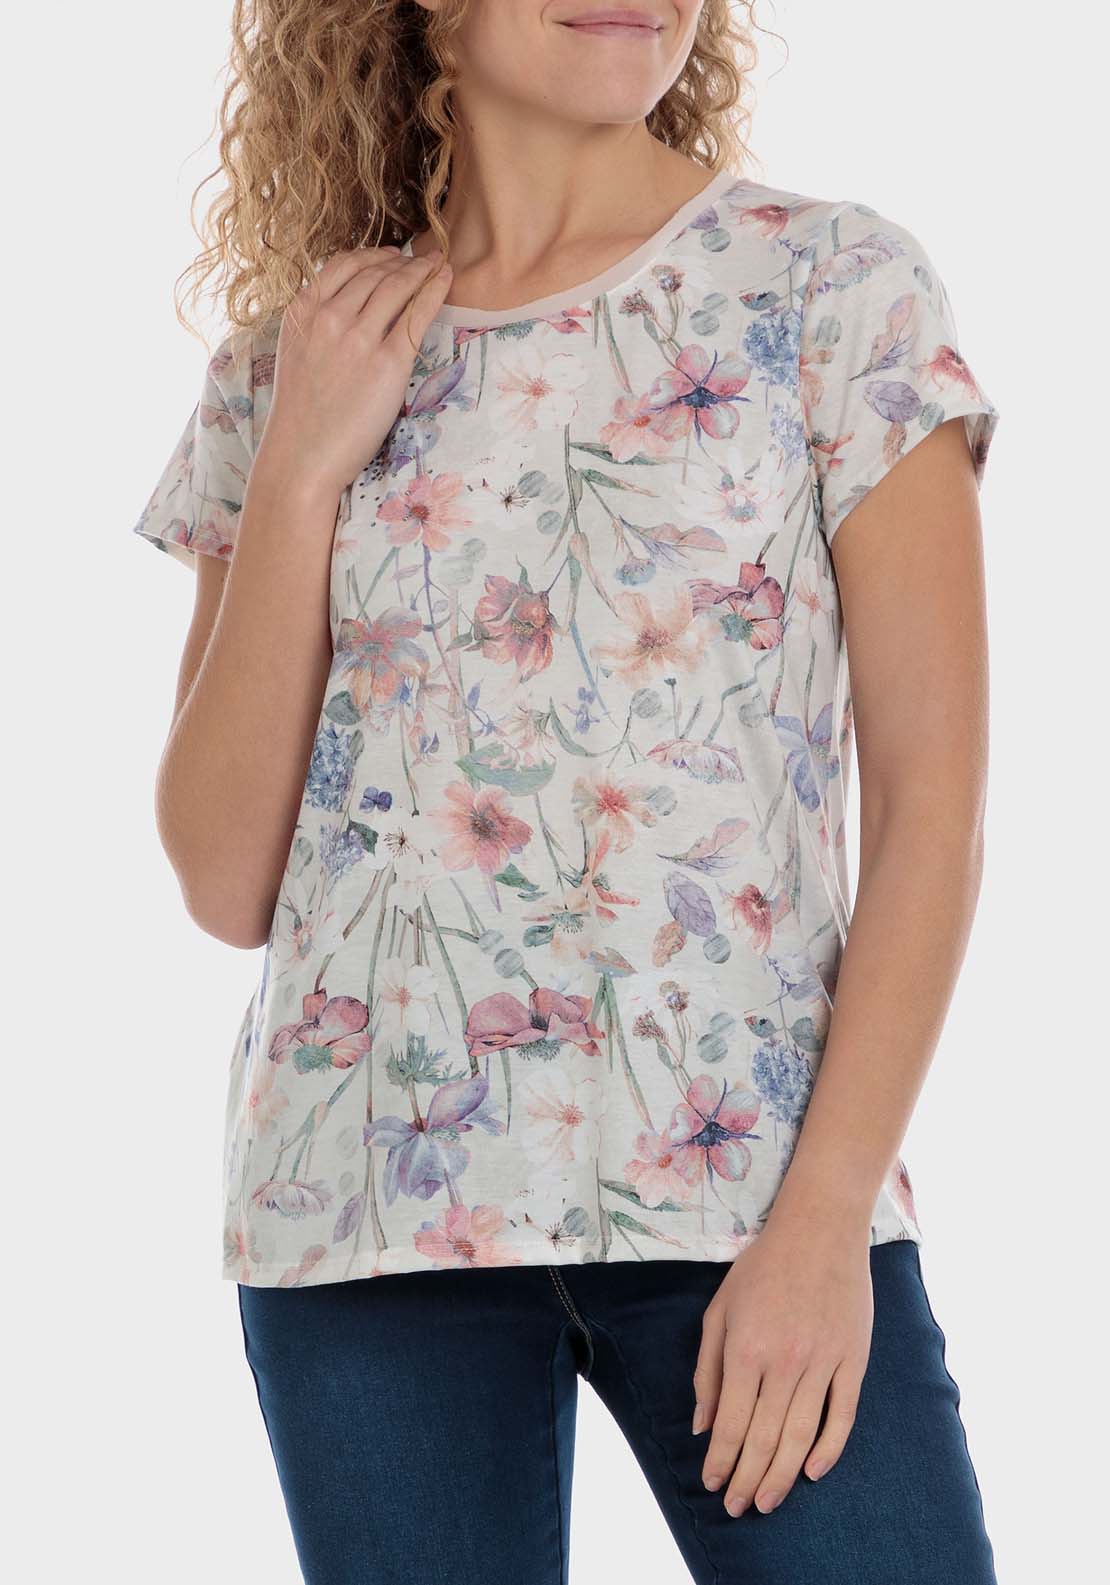 Punt Roma Floral Print T-Shirt 1 Shaws Department Stores